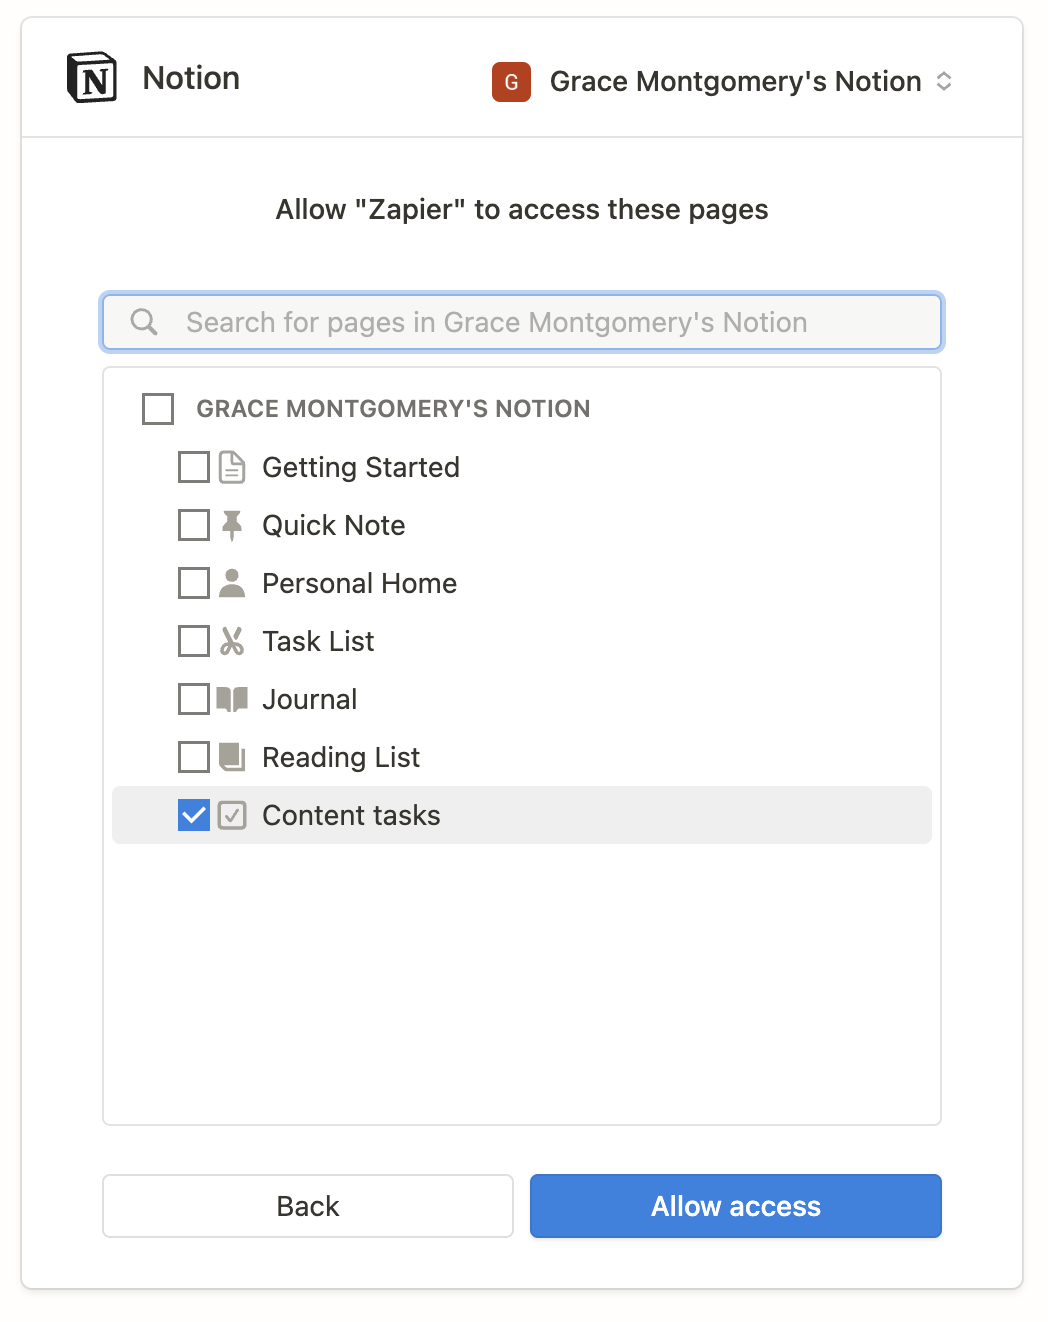 A pop-up page with the header "Allow Zapier to access these pages" is shown with a list of Notion databases with checkmarks next to them.